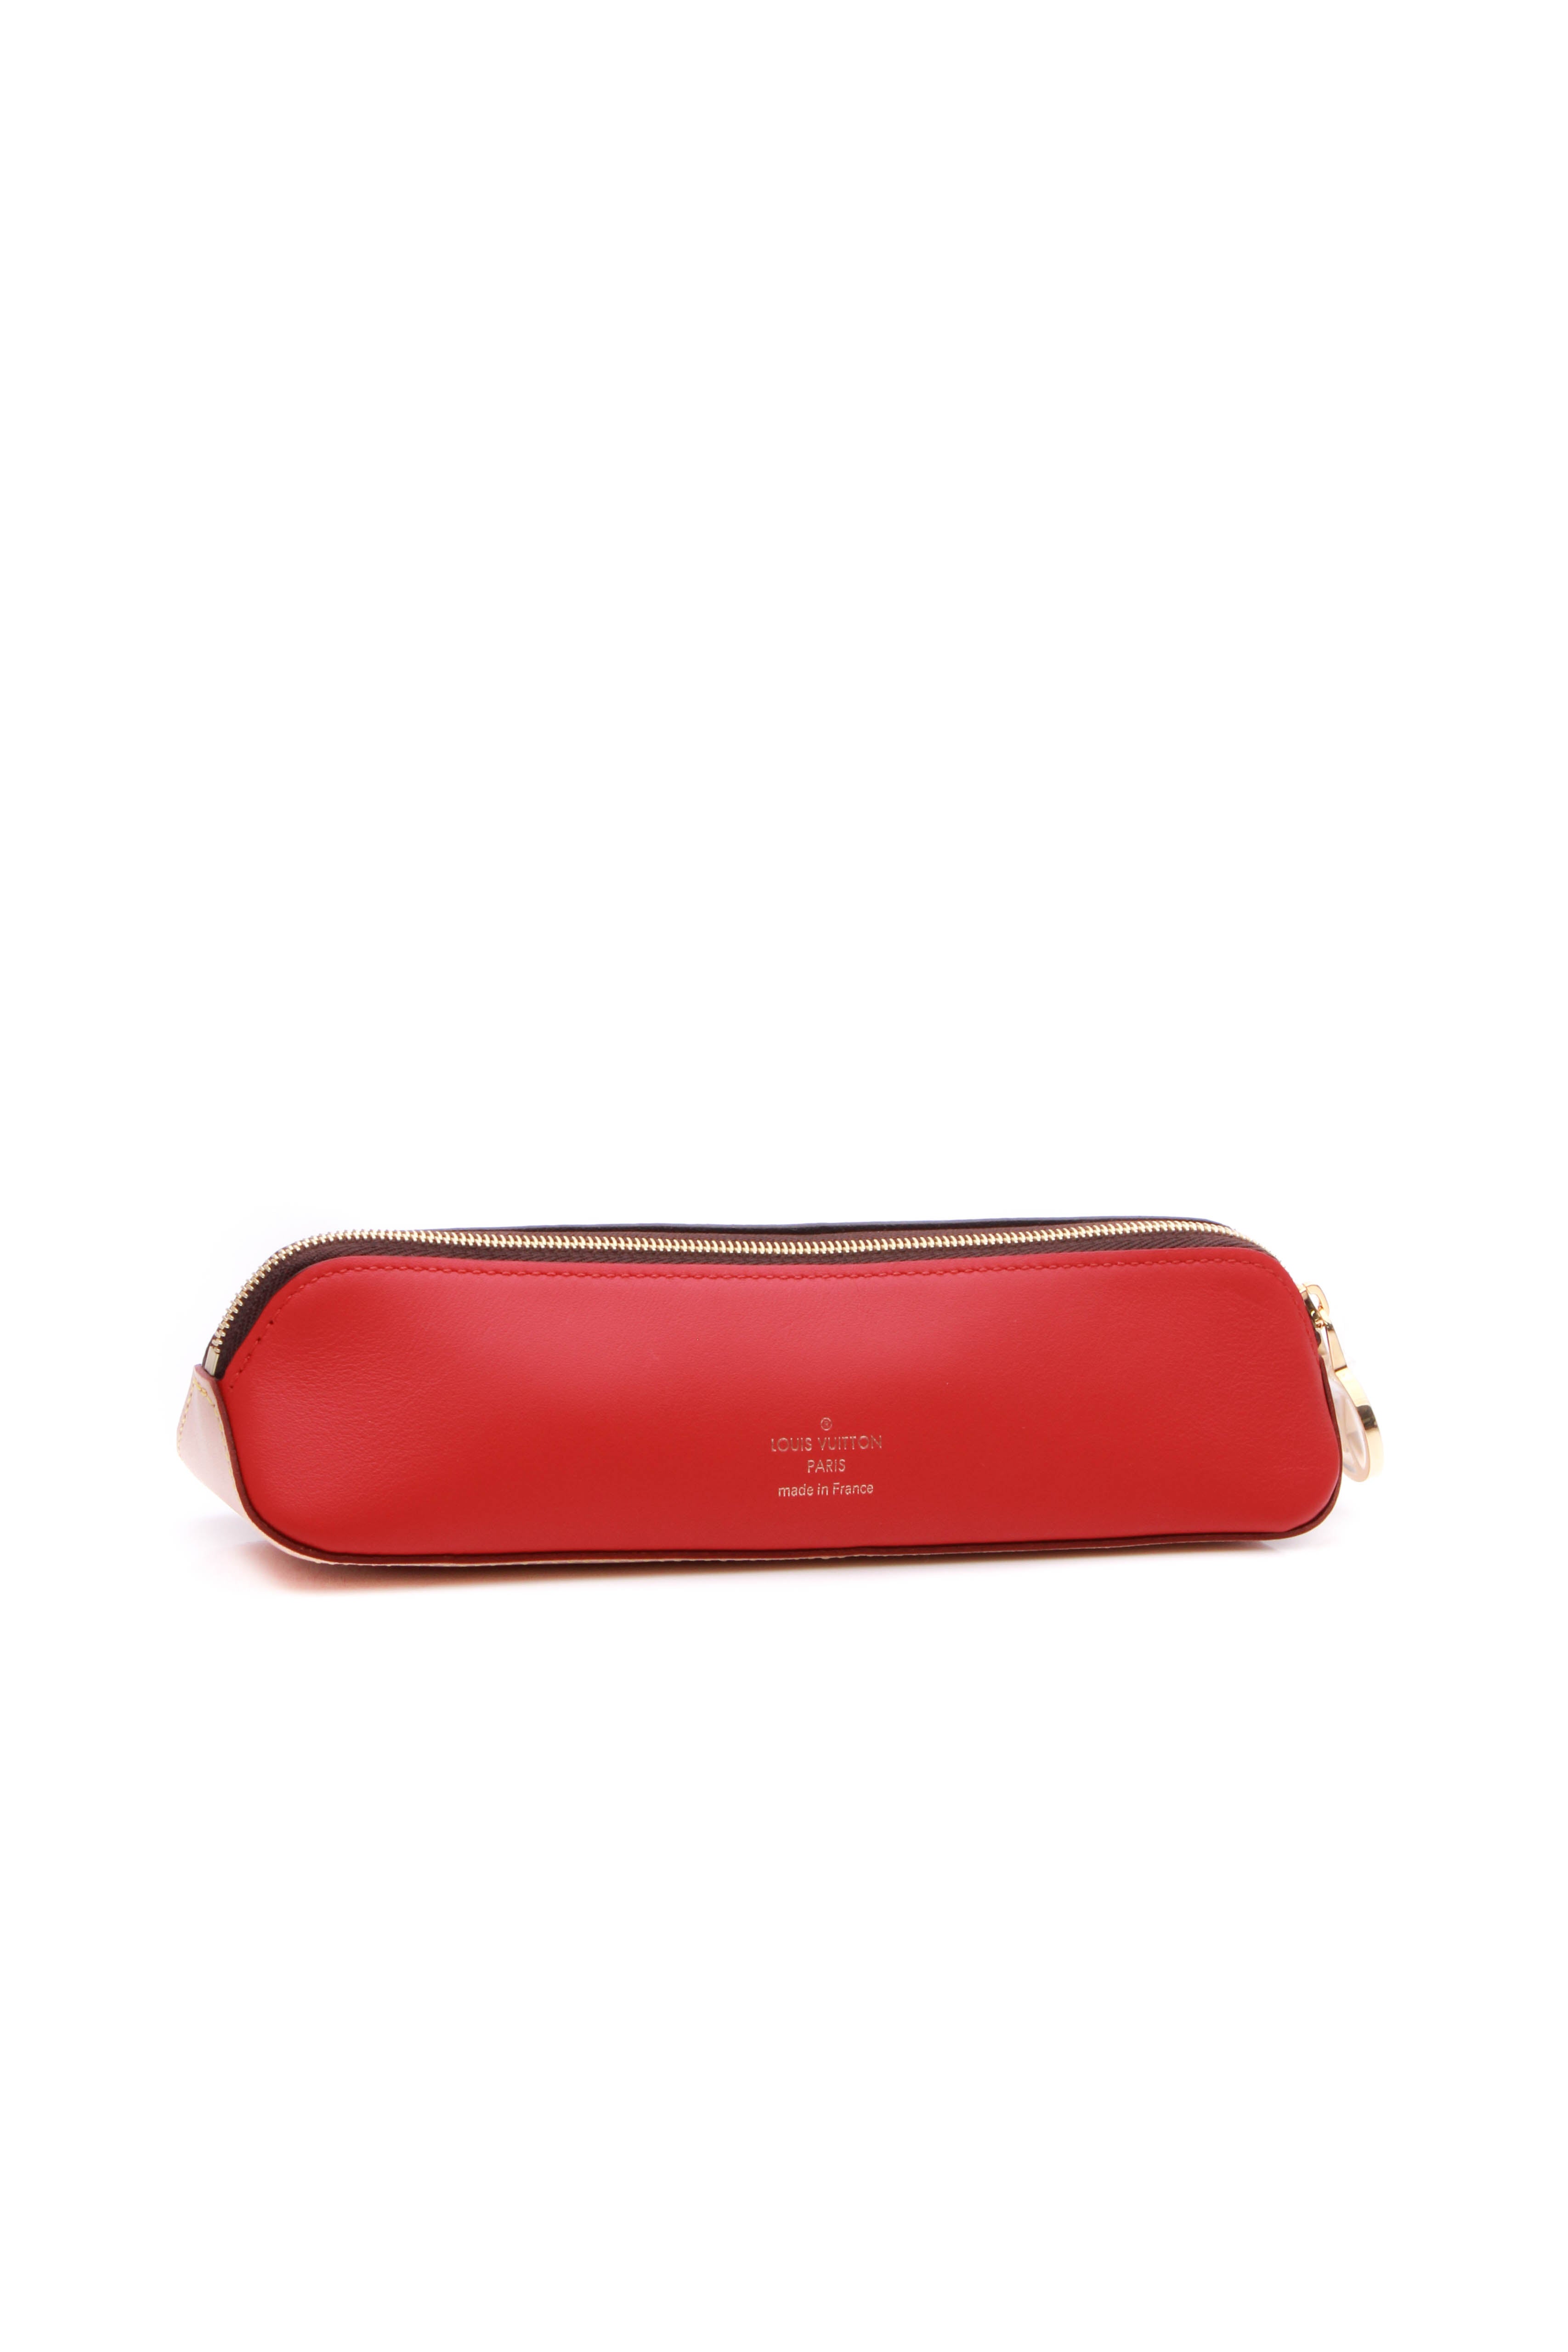 HERMES Western And Company Pencil Case